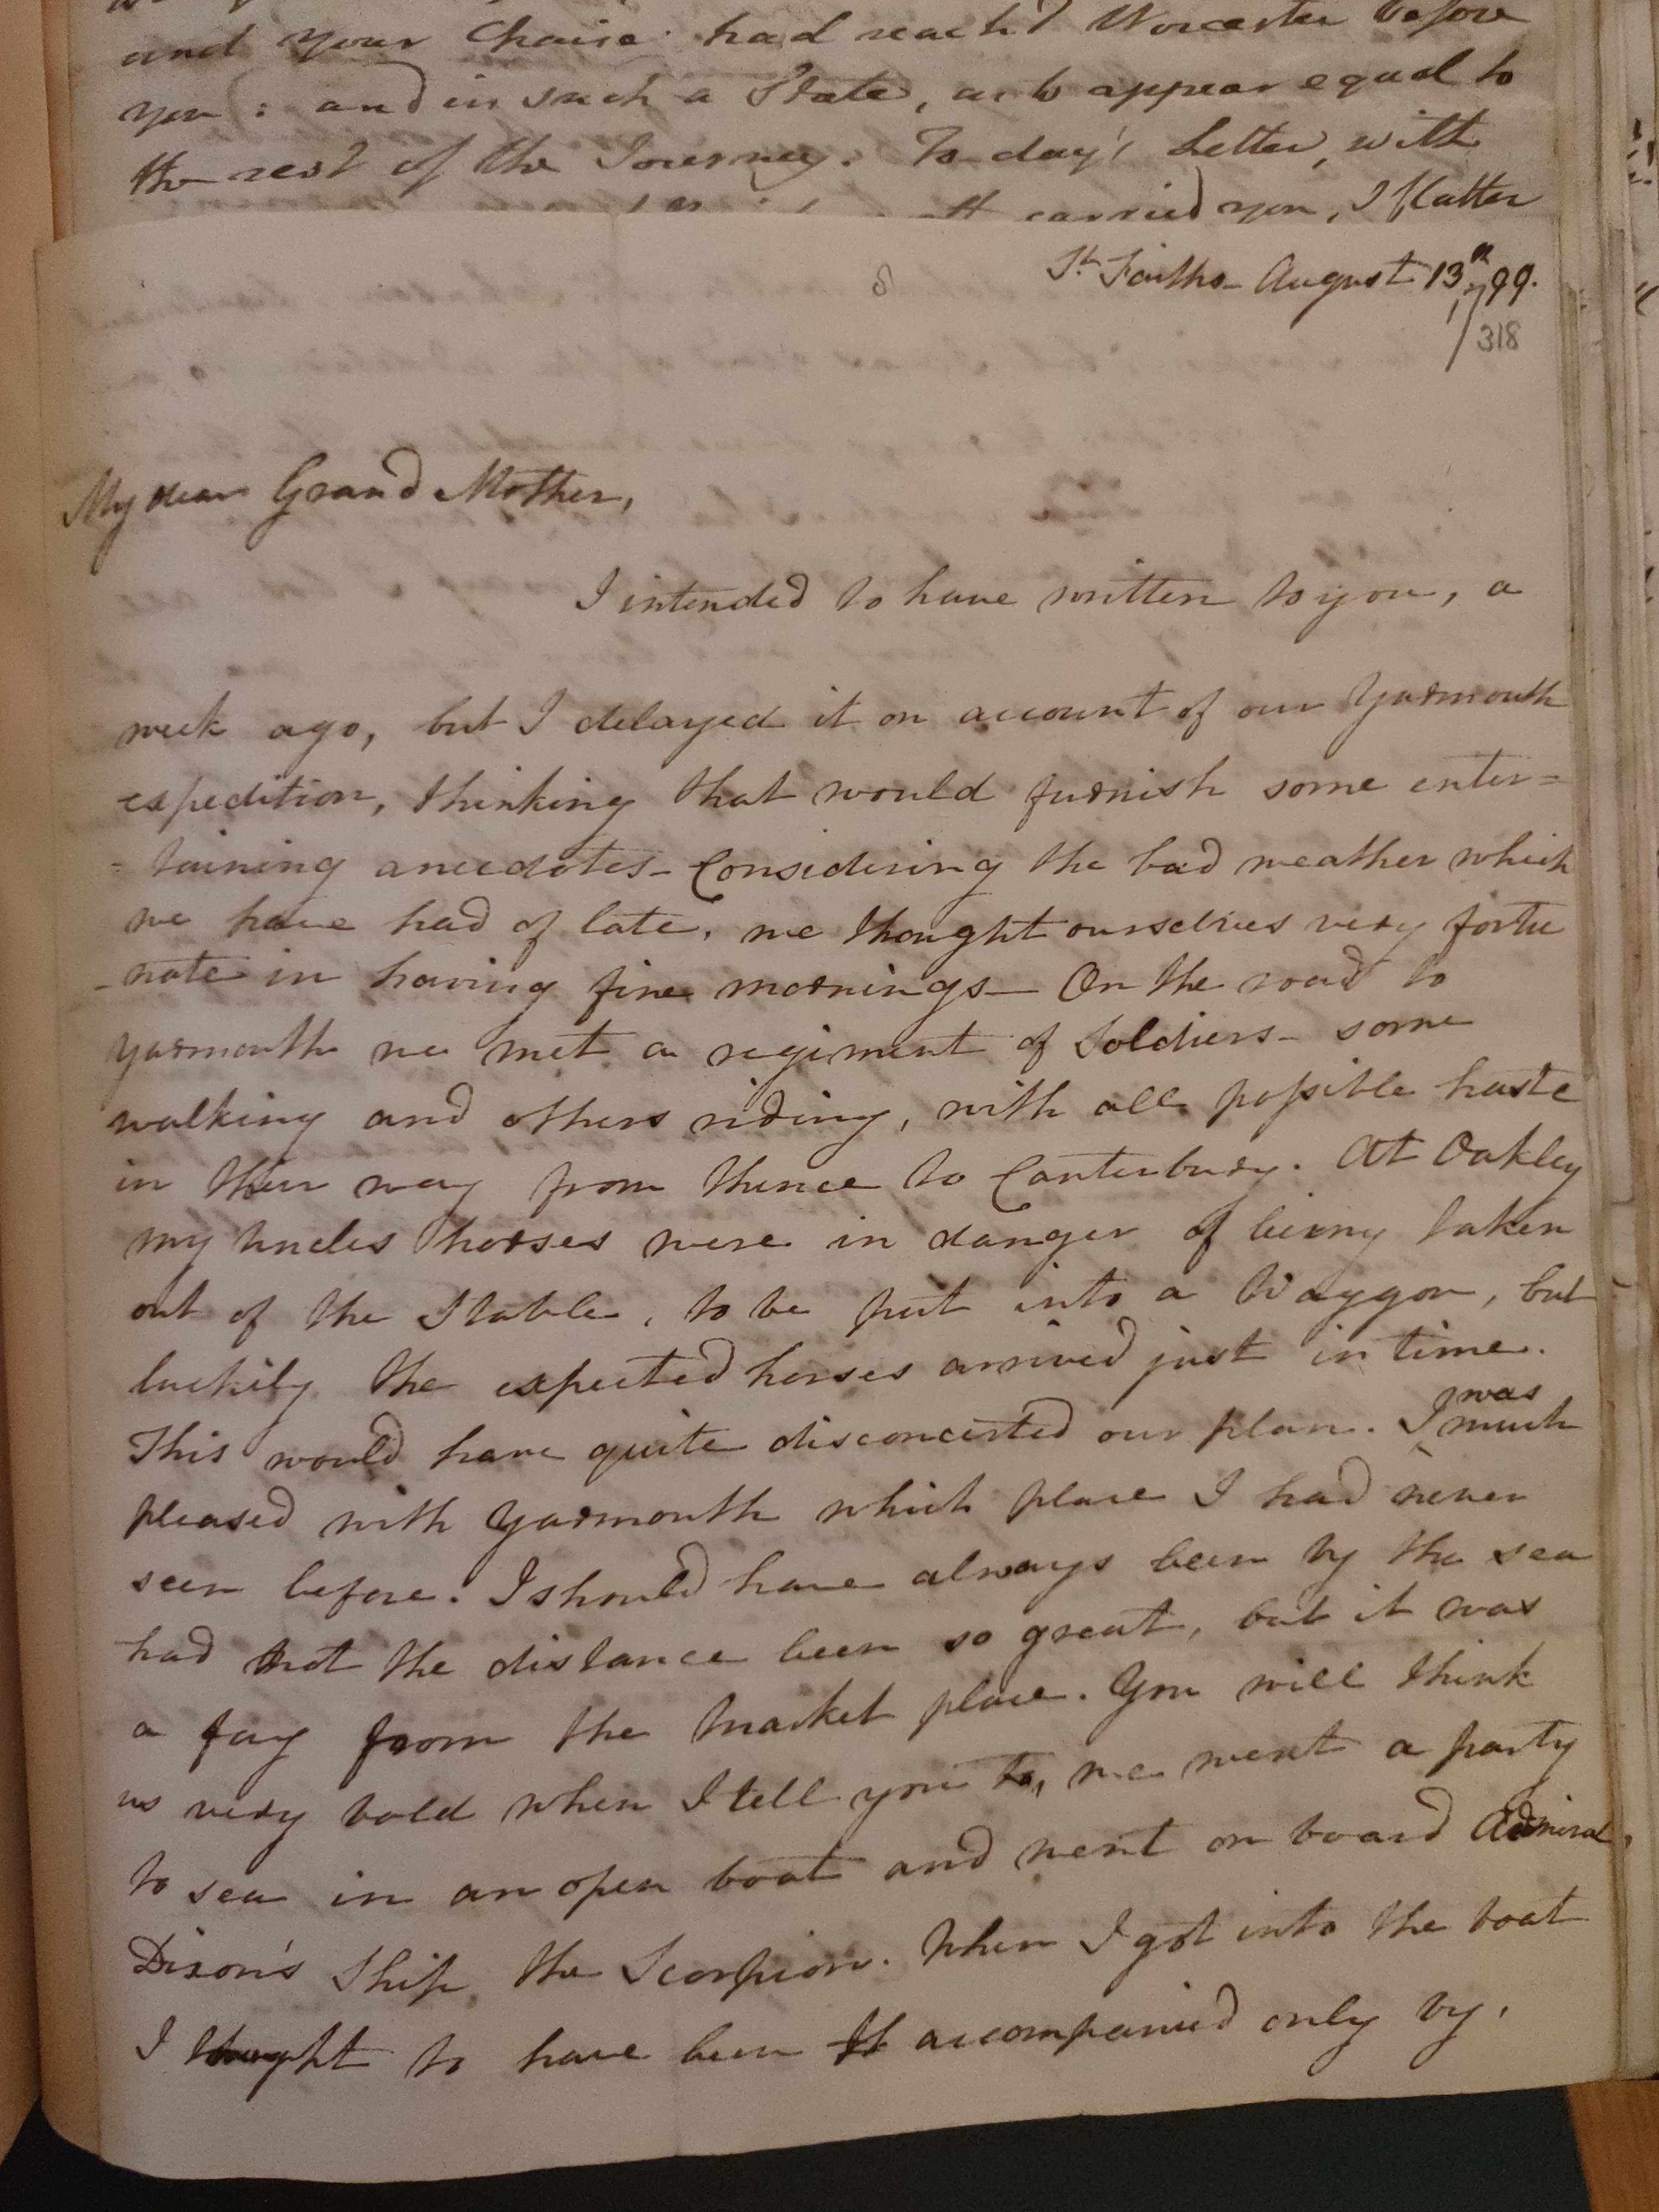 Image #1 of letter: Ann Twining to Mary Twining, 13 August 1799